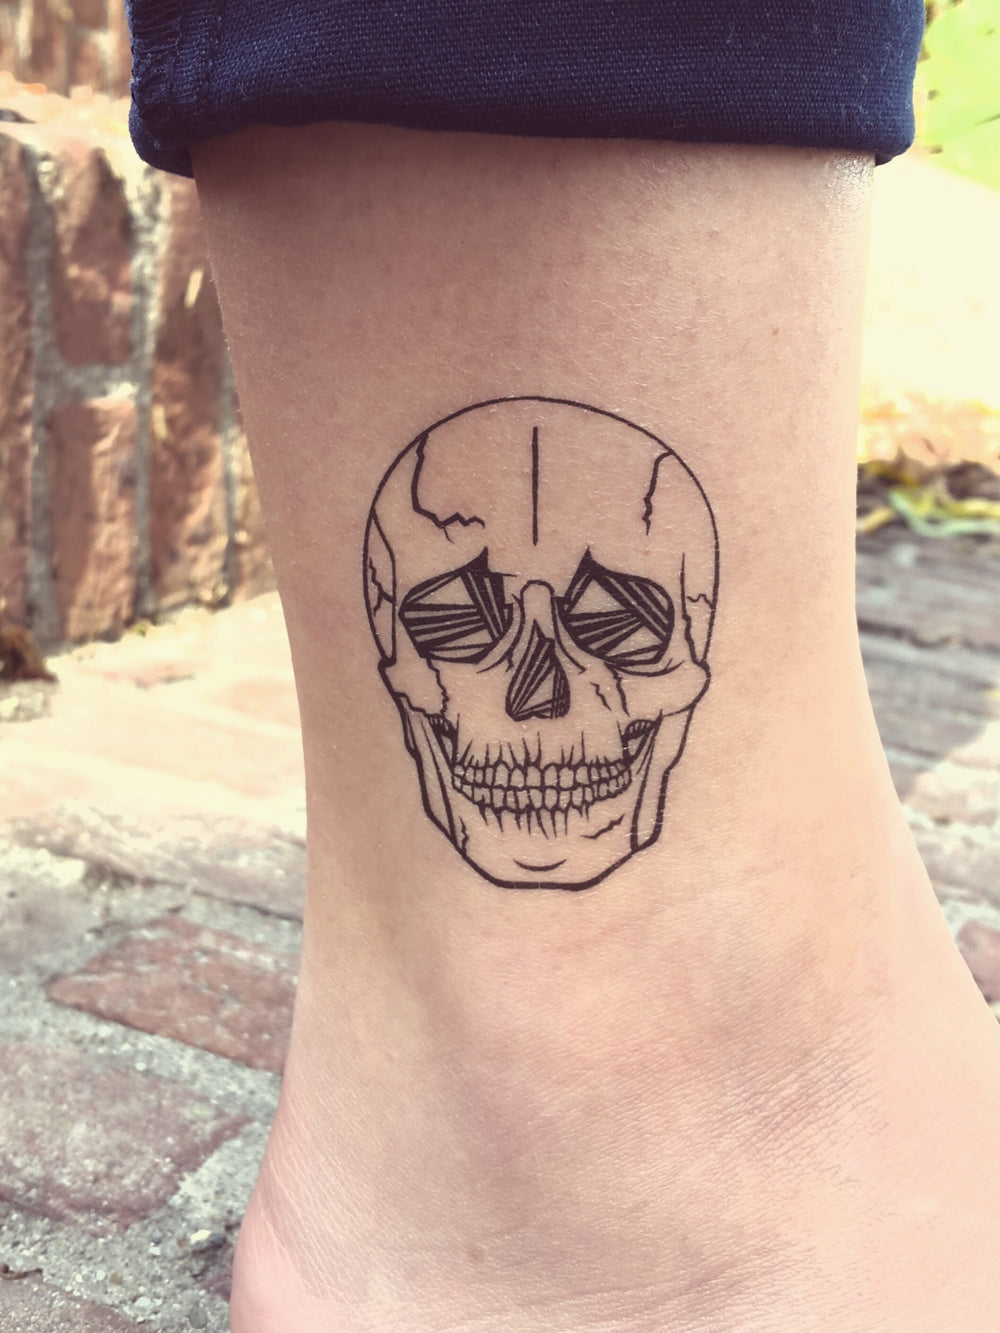 emily.tuff - Two cute little skull tattoos from yesterday!... | Facebook